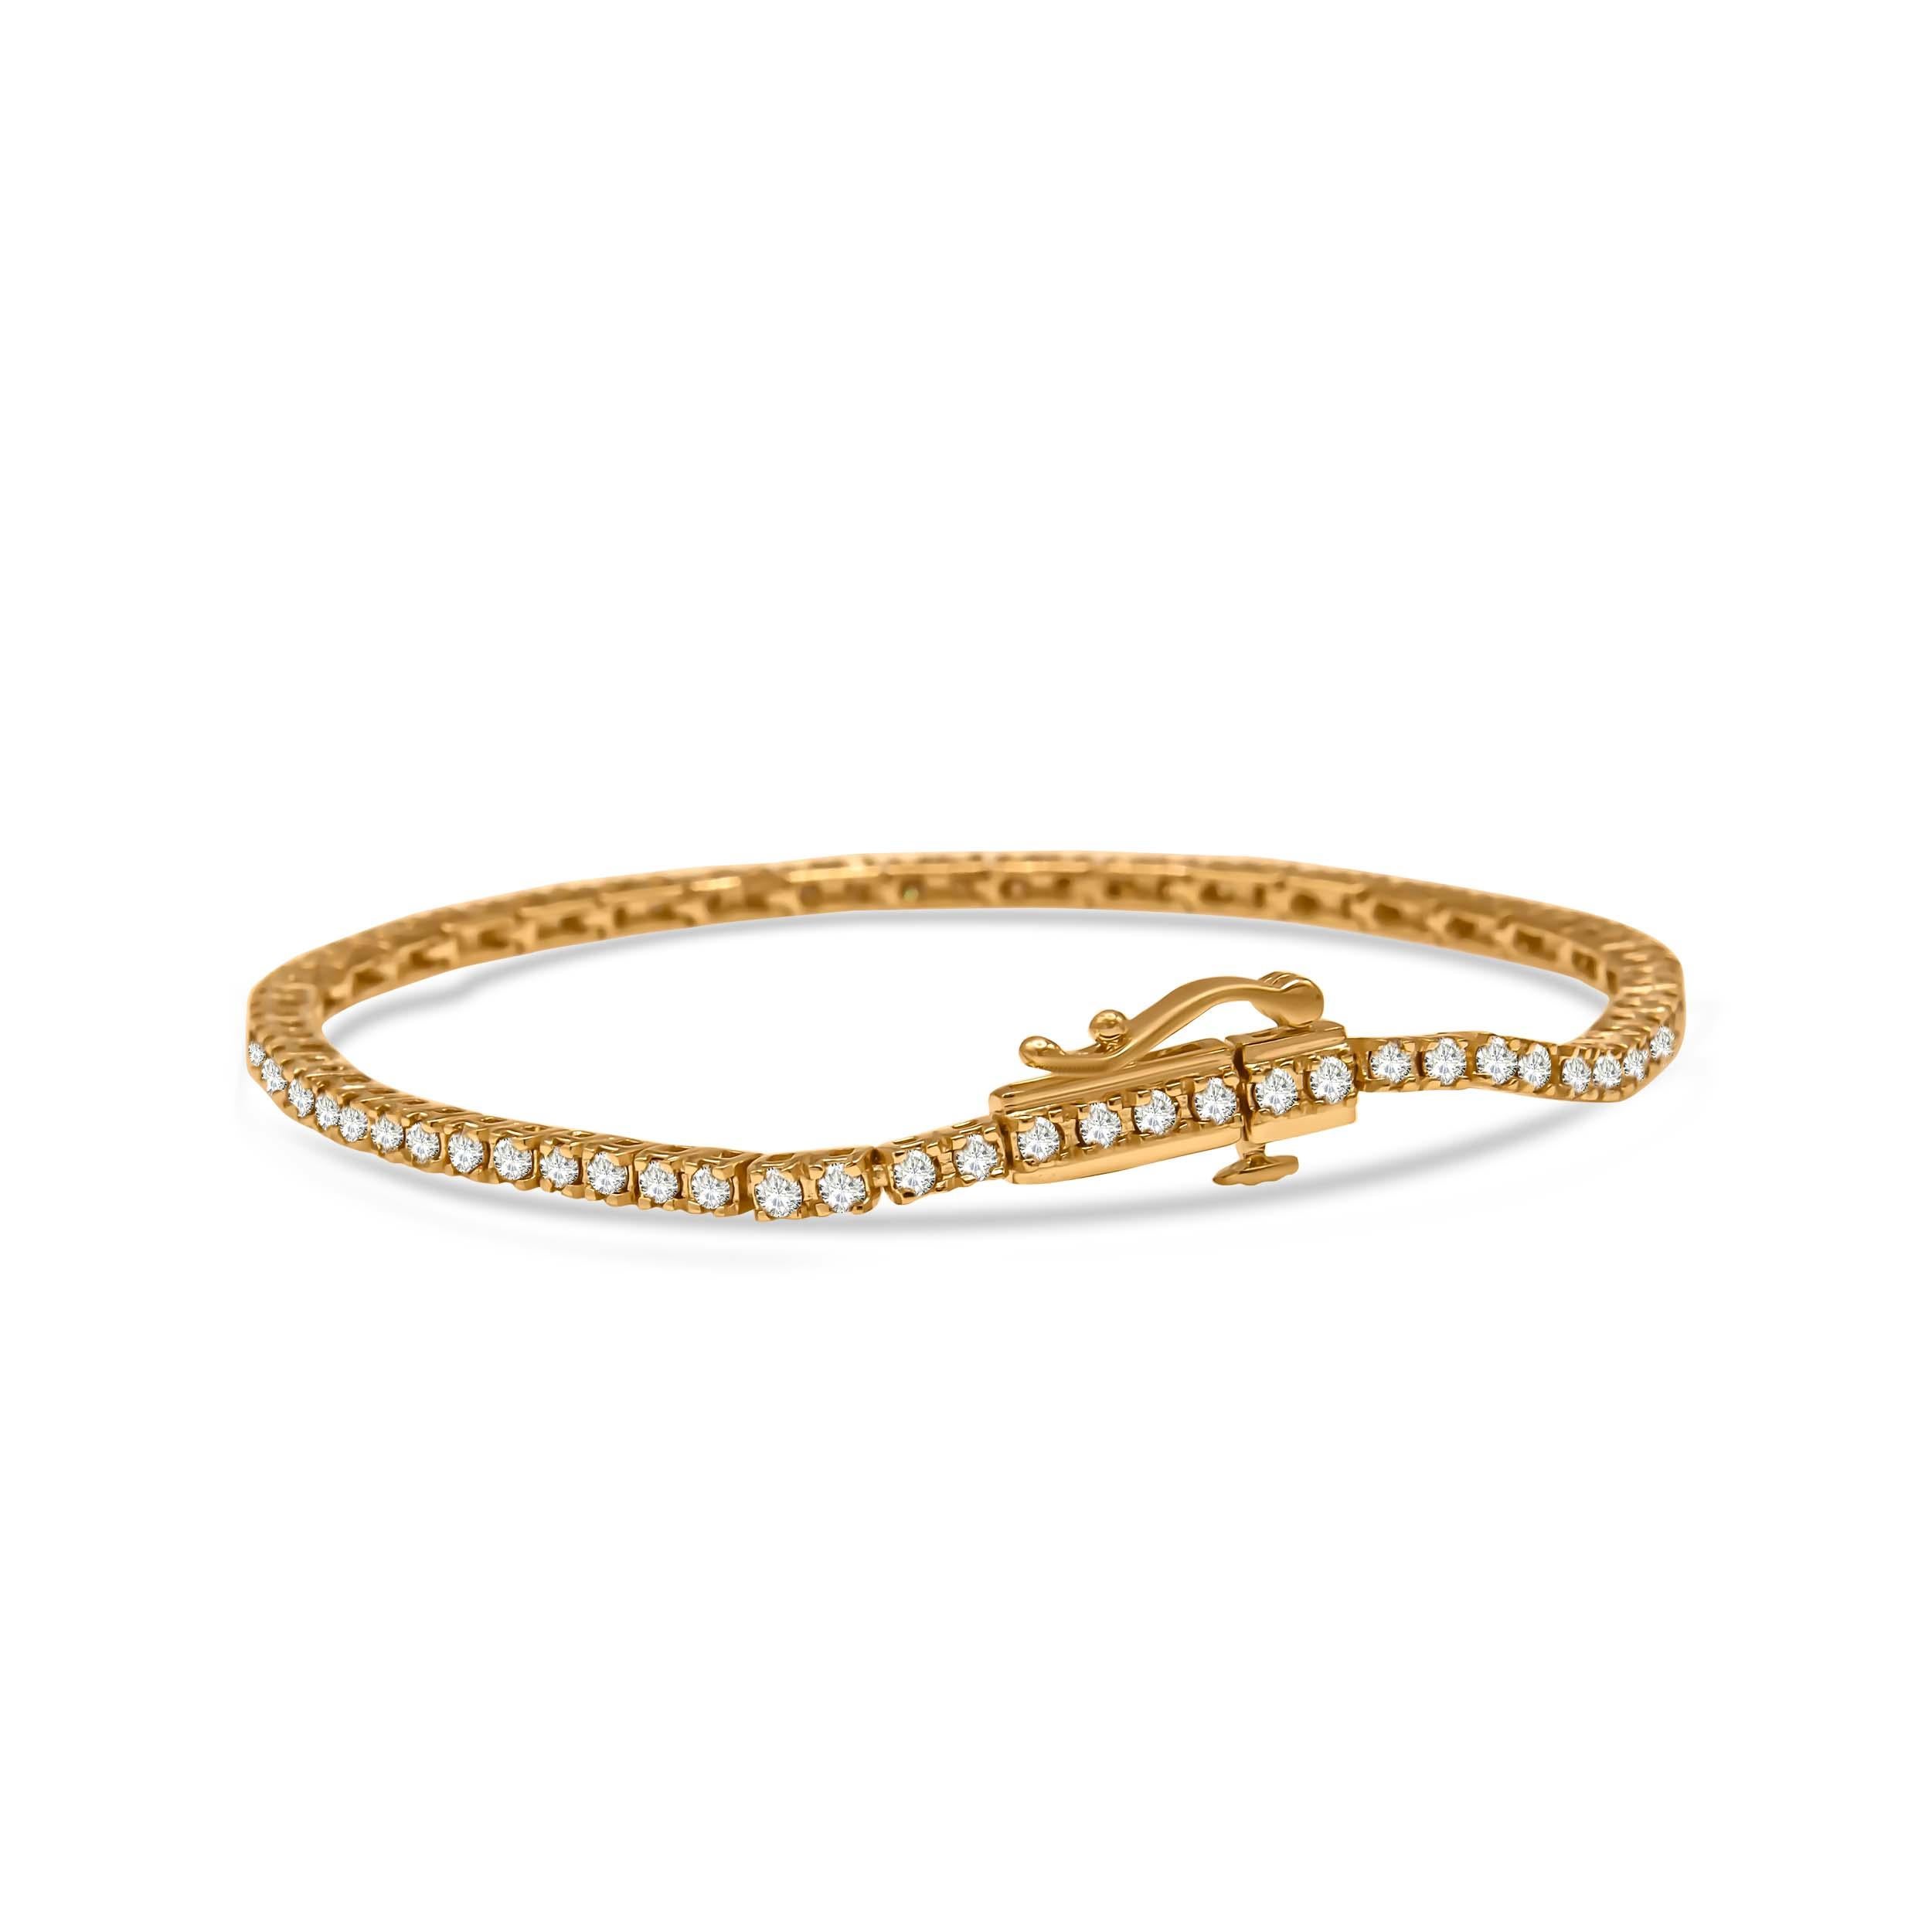 You may already own a tennis bracelet in your collection, but here’s one that’s not to be missed. Unlike the typical bracelet, this piece starts with a 10K yellow gold plated .925 Sterling Silver base that strikingly juxtaposes against the natural